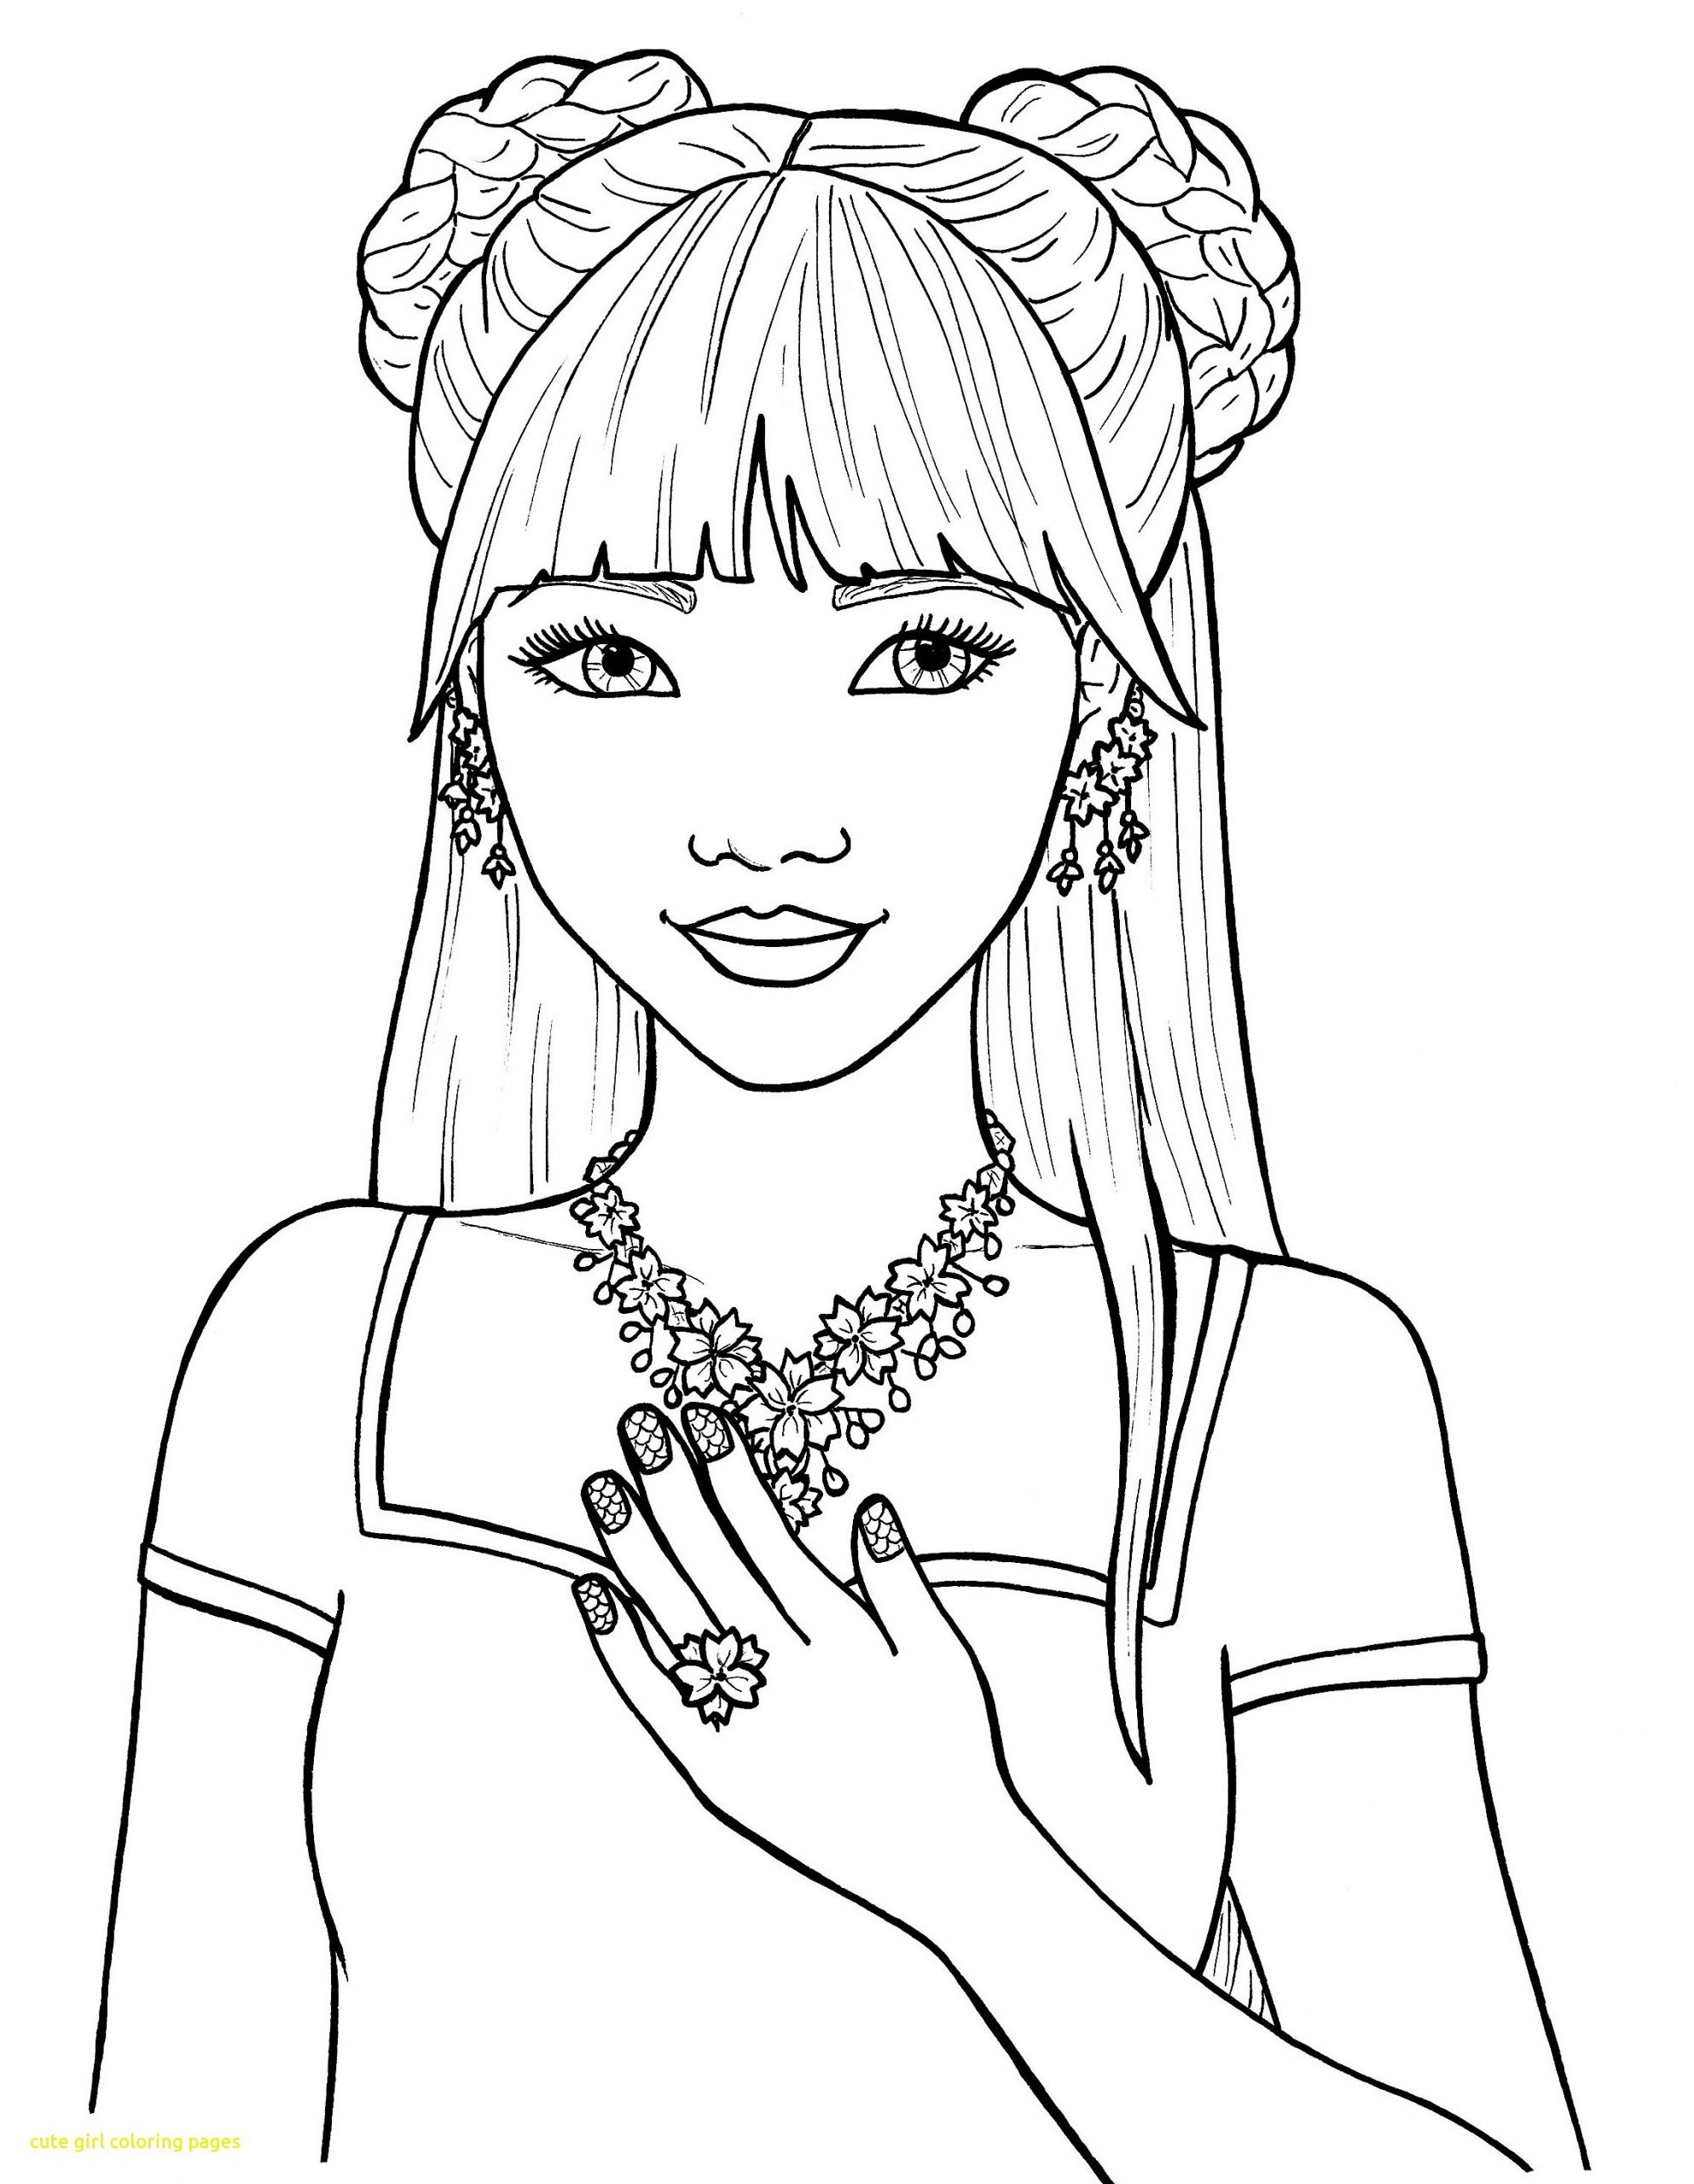 Online Coloring Pages Girls
 Coloring Pages for Girls Best Coloring Pages For Kids